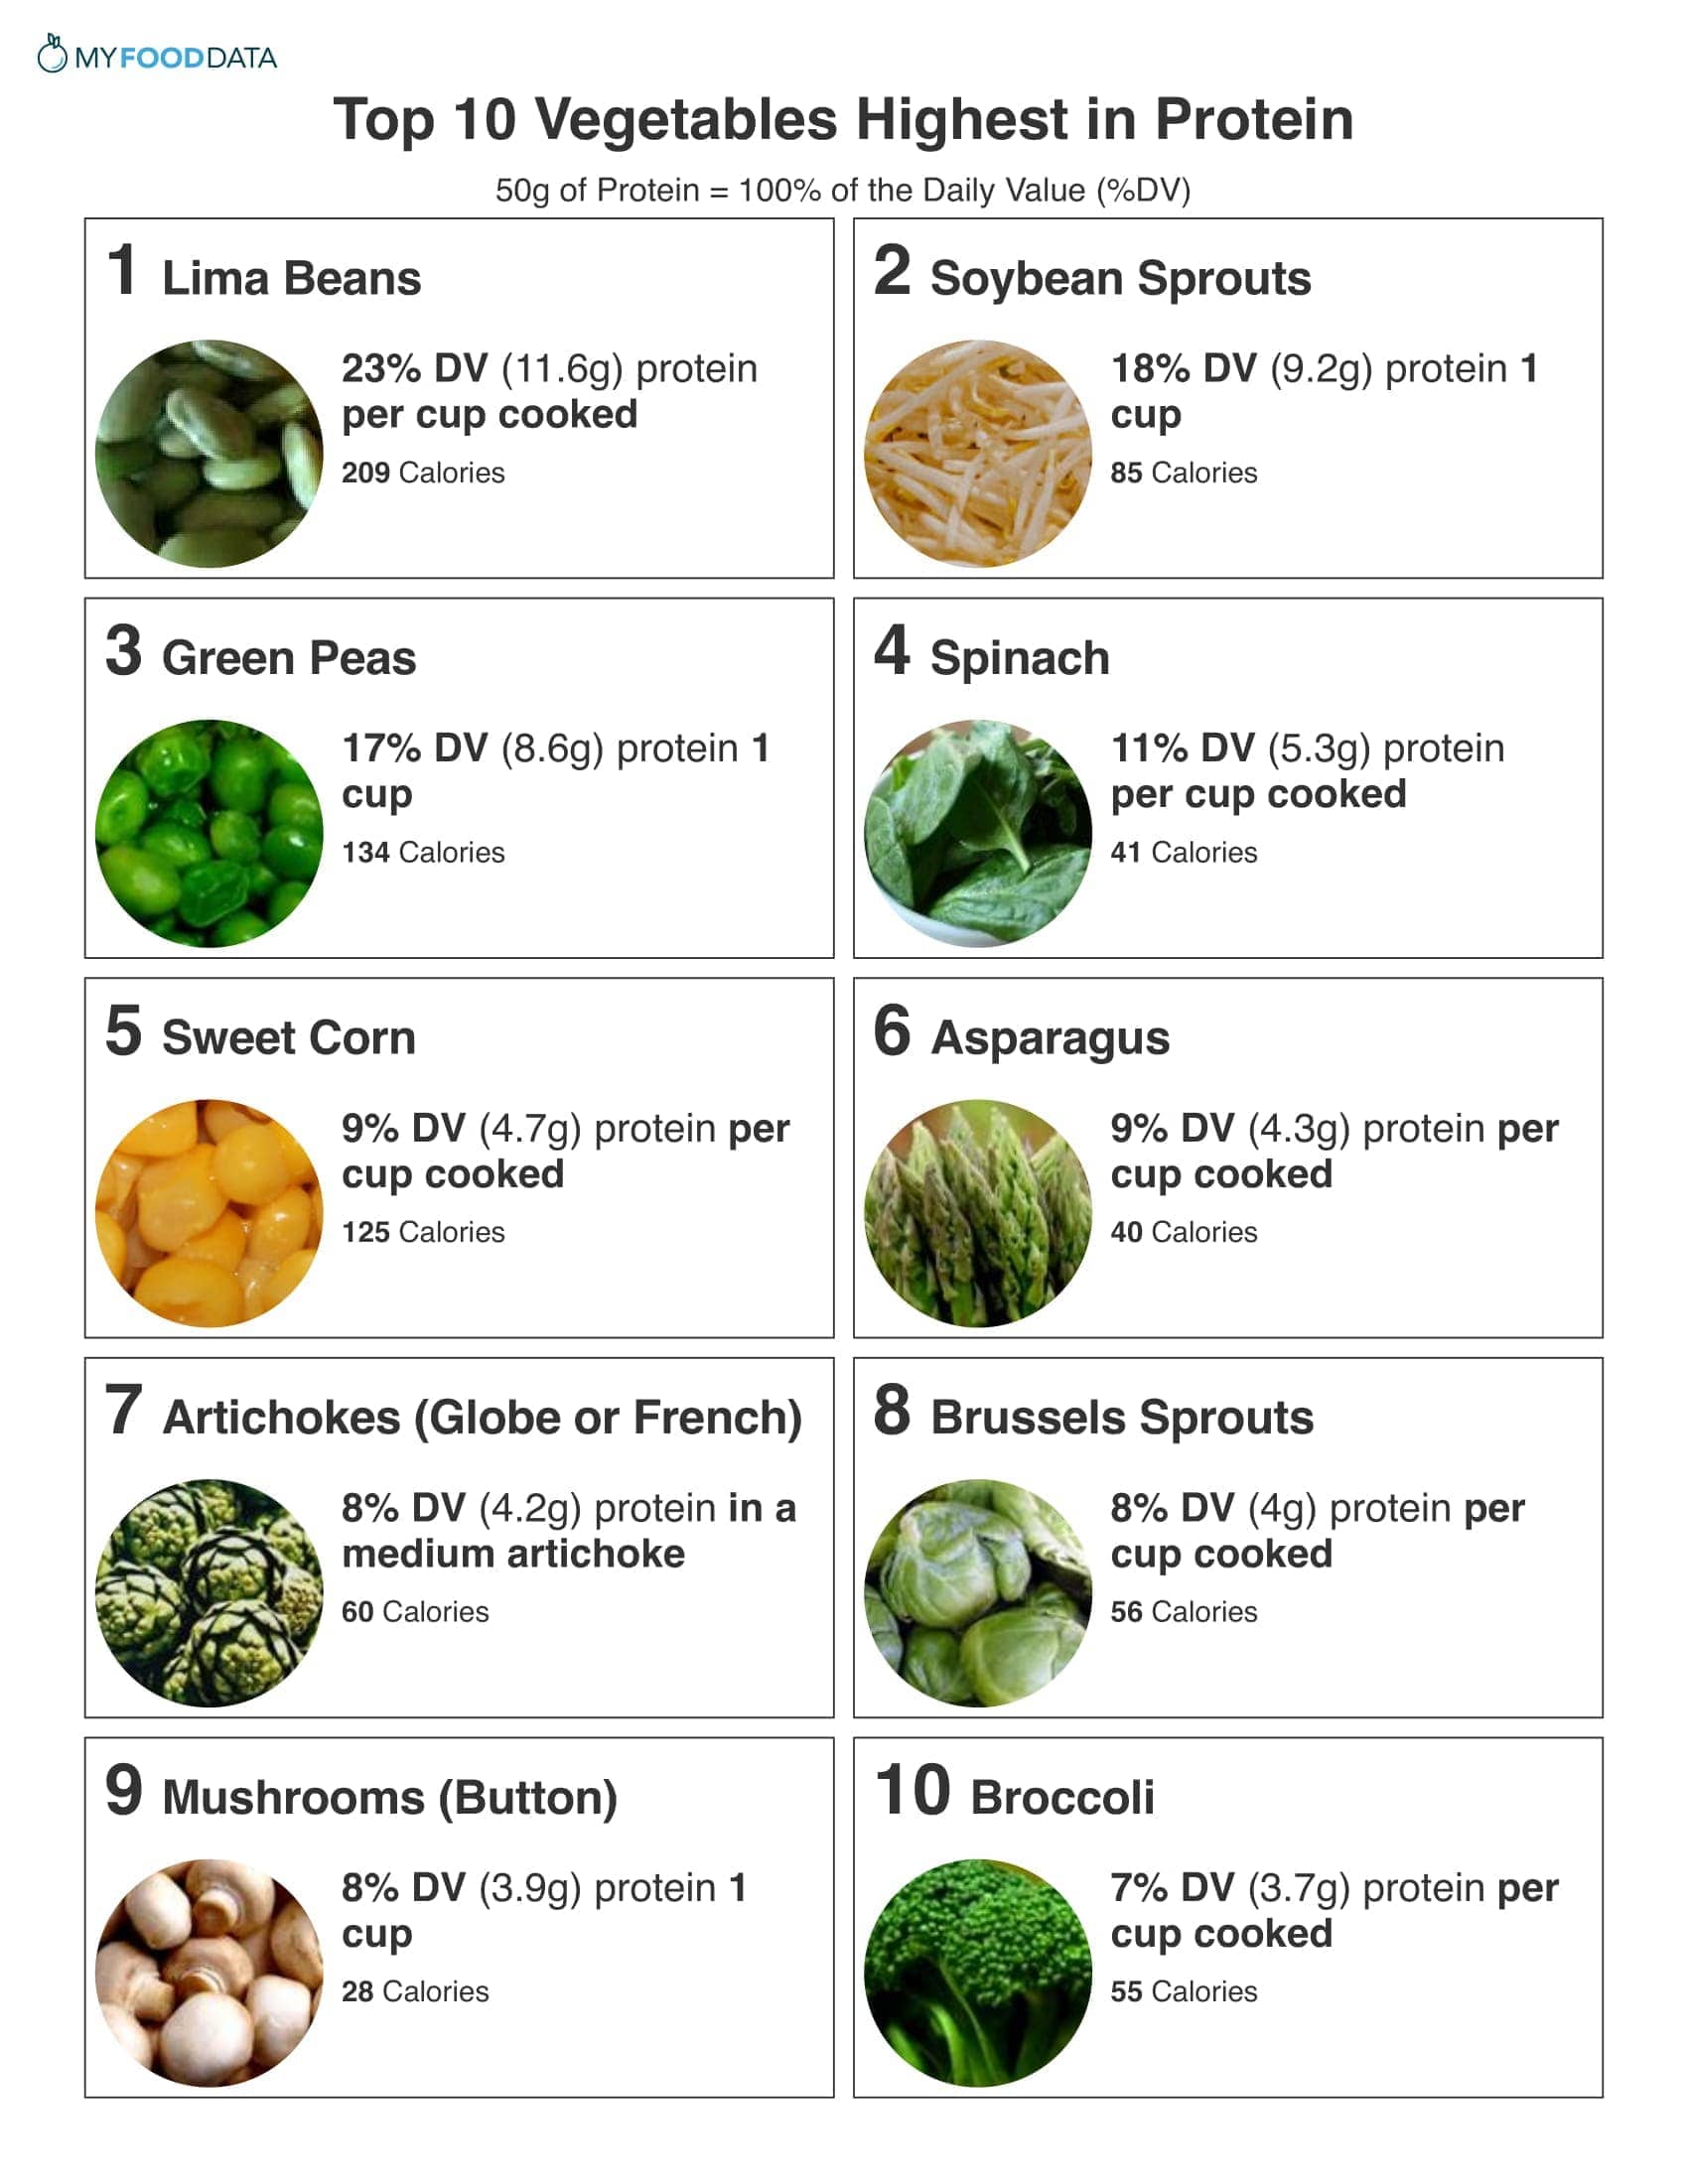 Top 10 Vegetables Highest in Protein